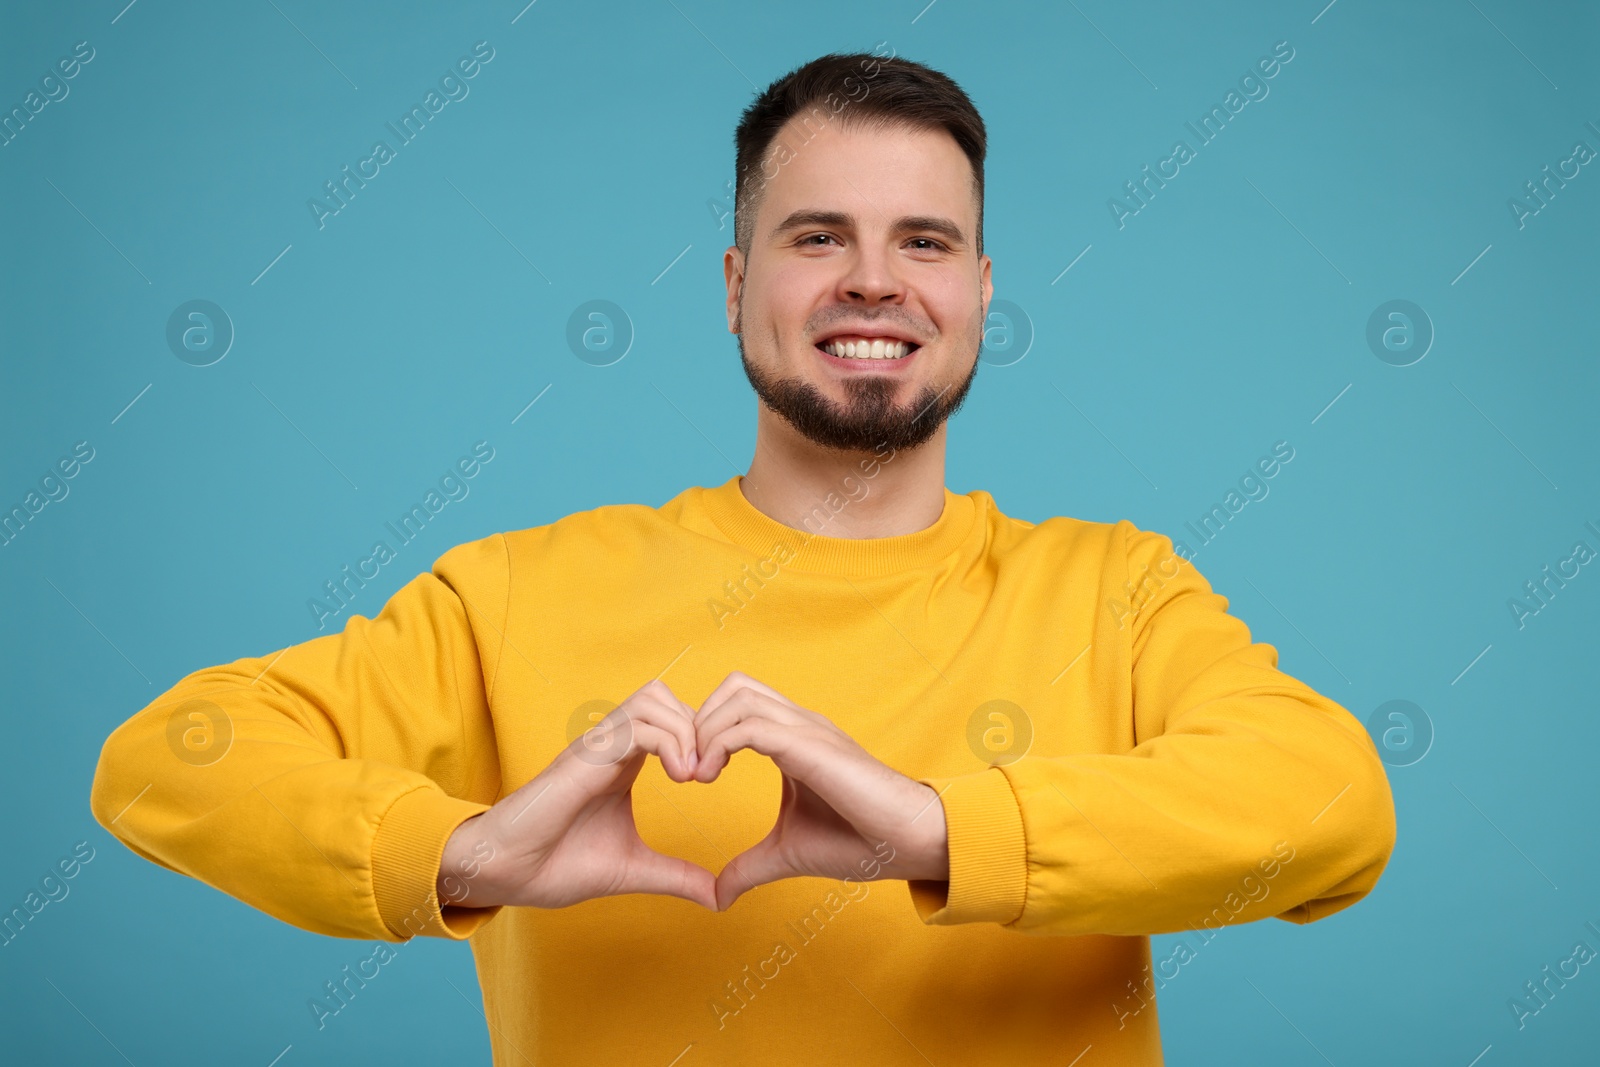 Photo of Man showing heart gesture with hands on light blue background